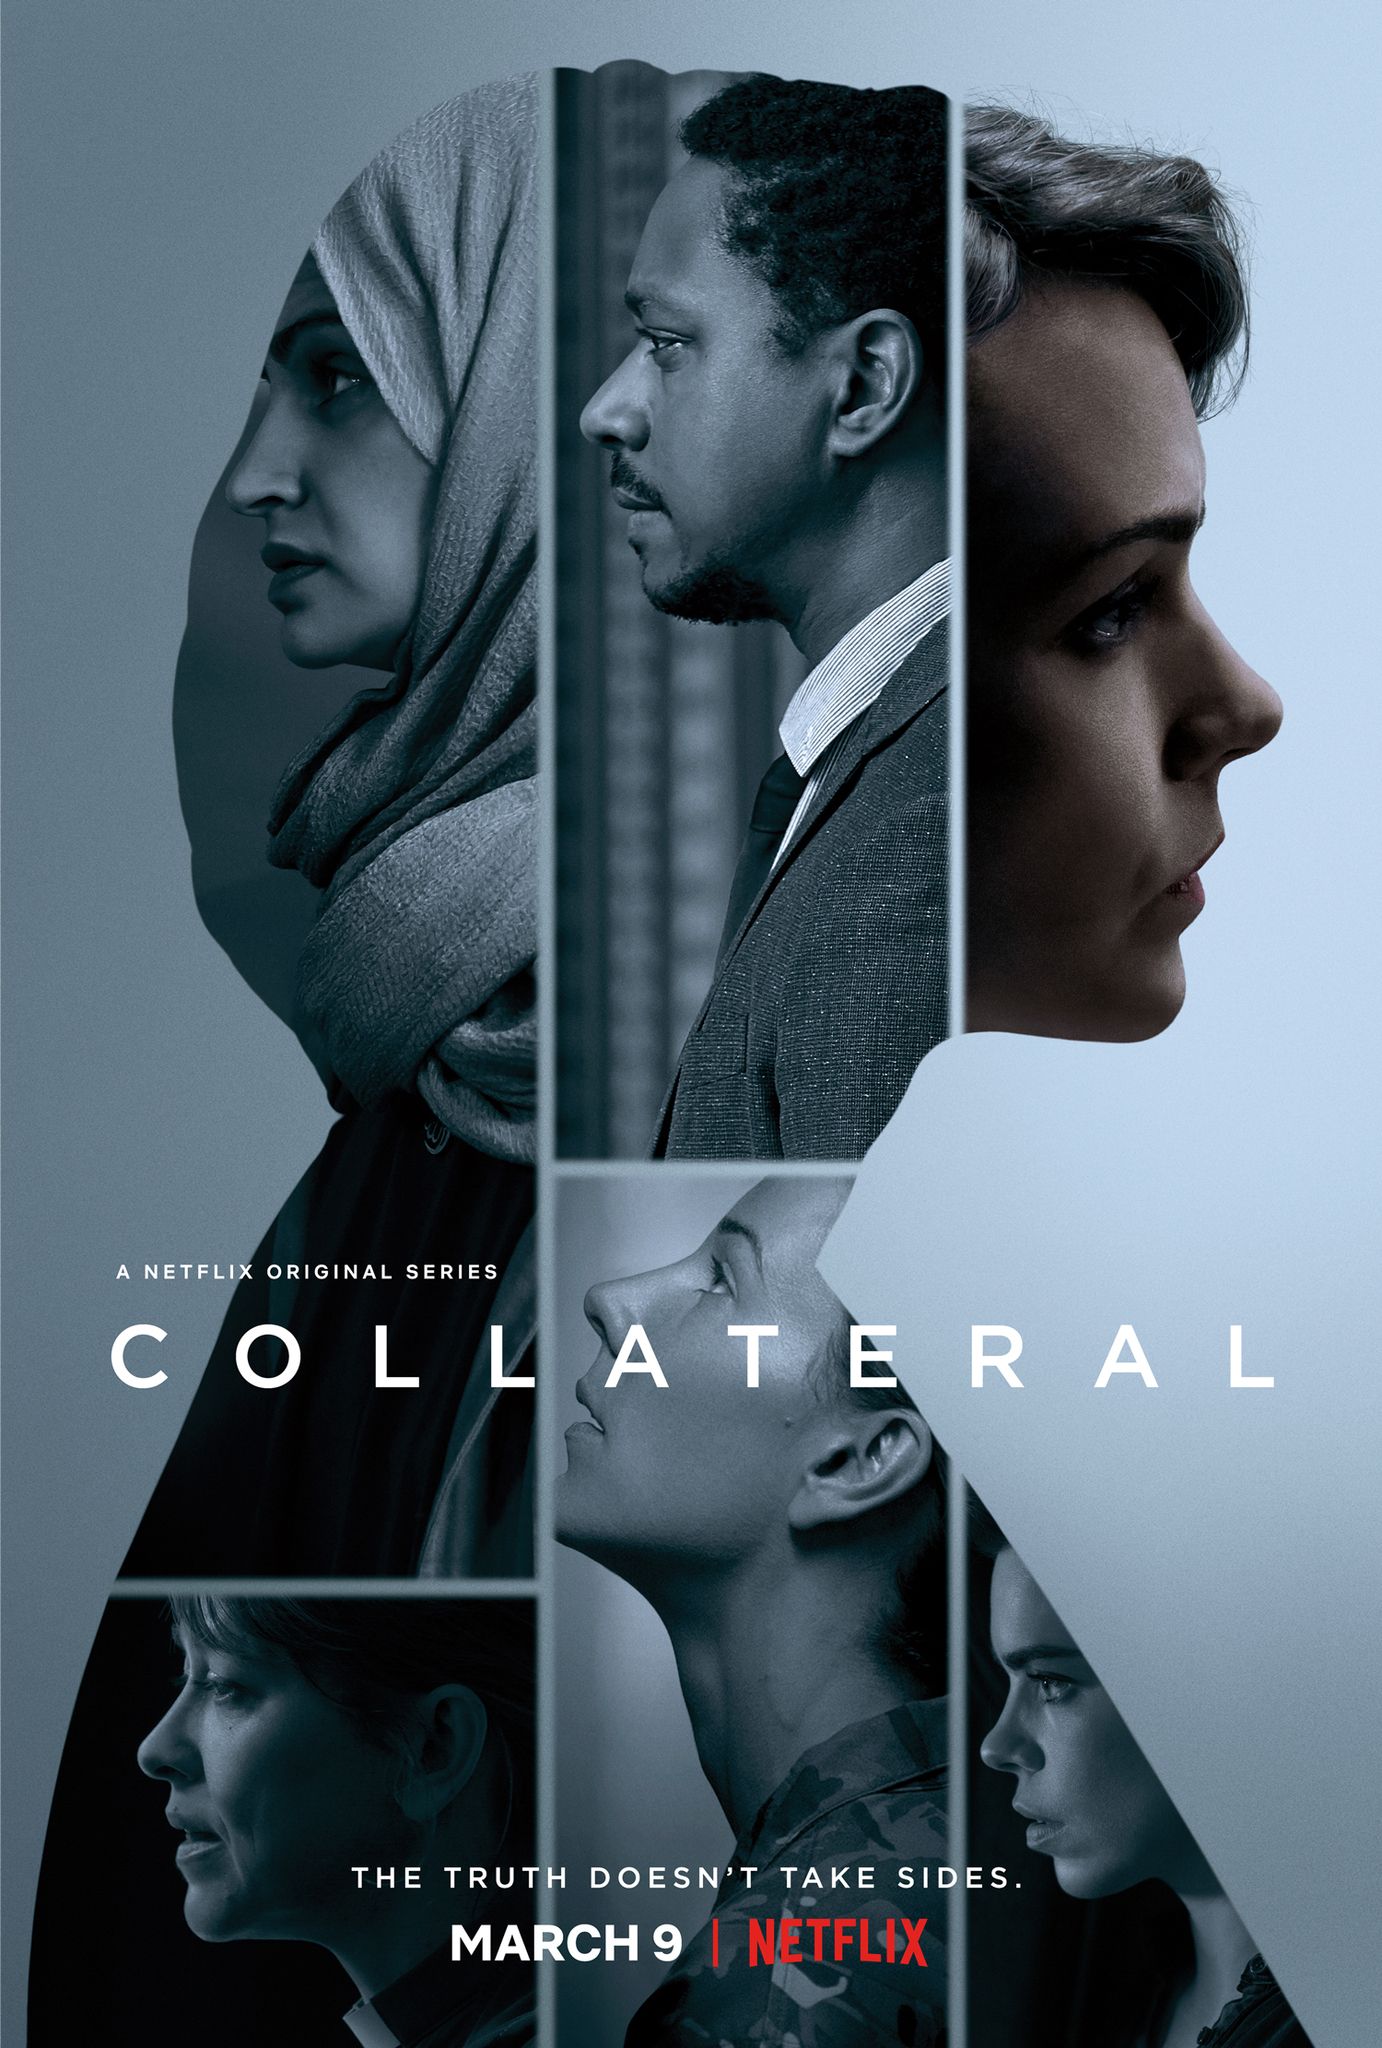 Collateral Netflix Poster